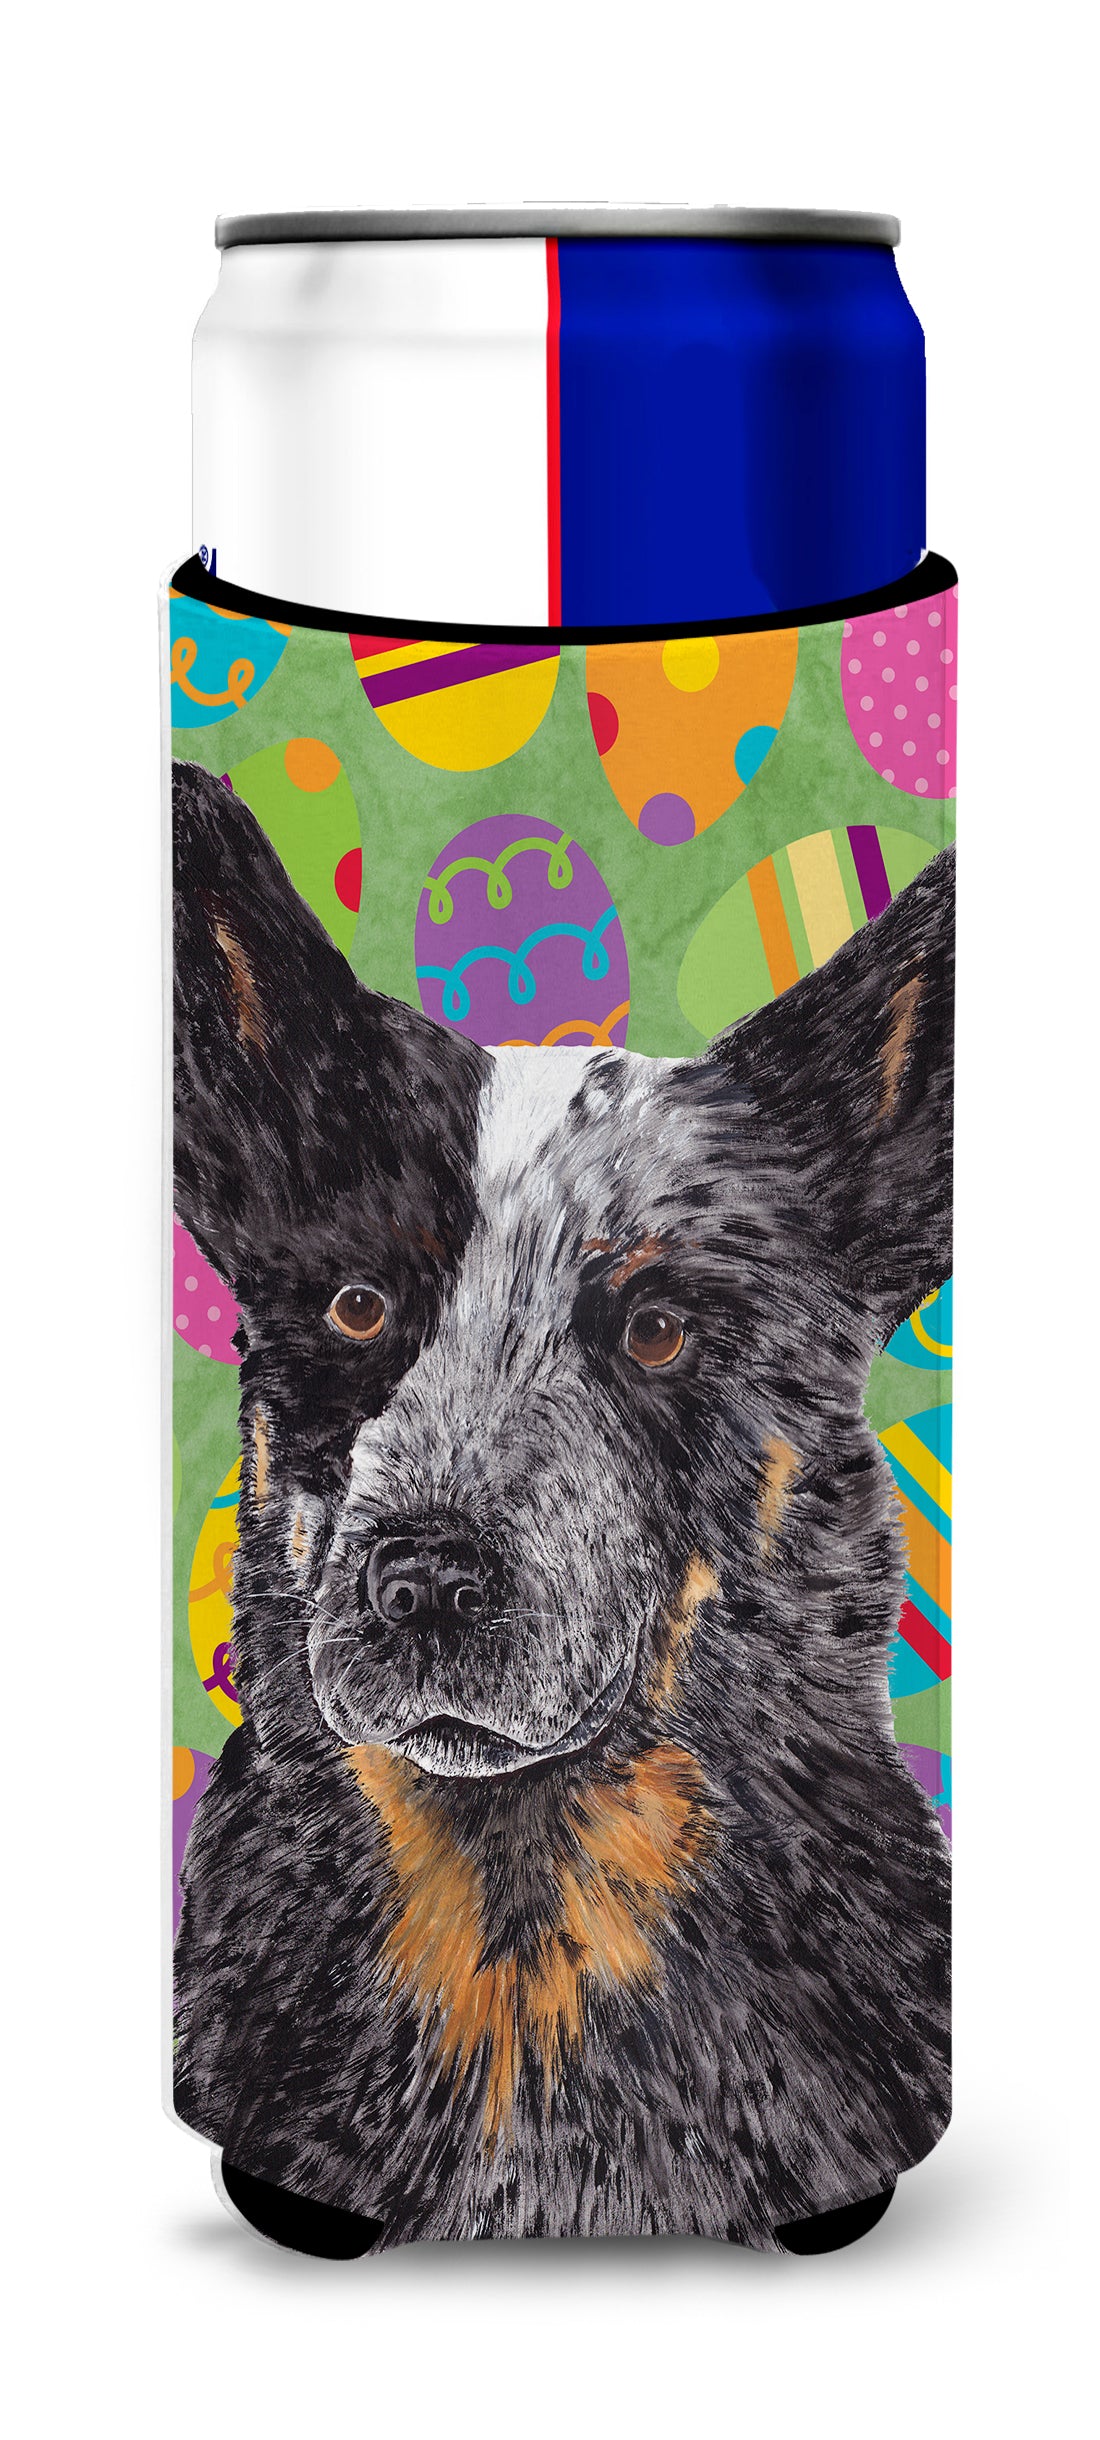 Australian Cattle Dog Easter Eggtravaganza Ultra Beverage Insulators for slim cans SC9476MUK.